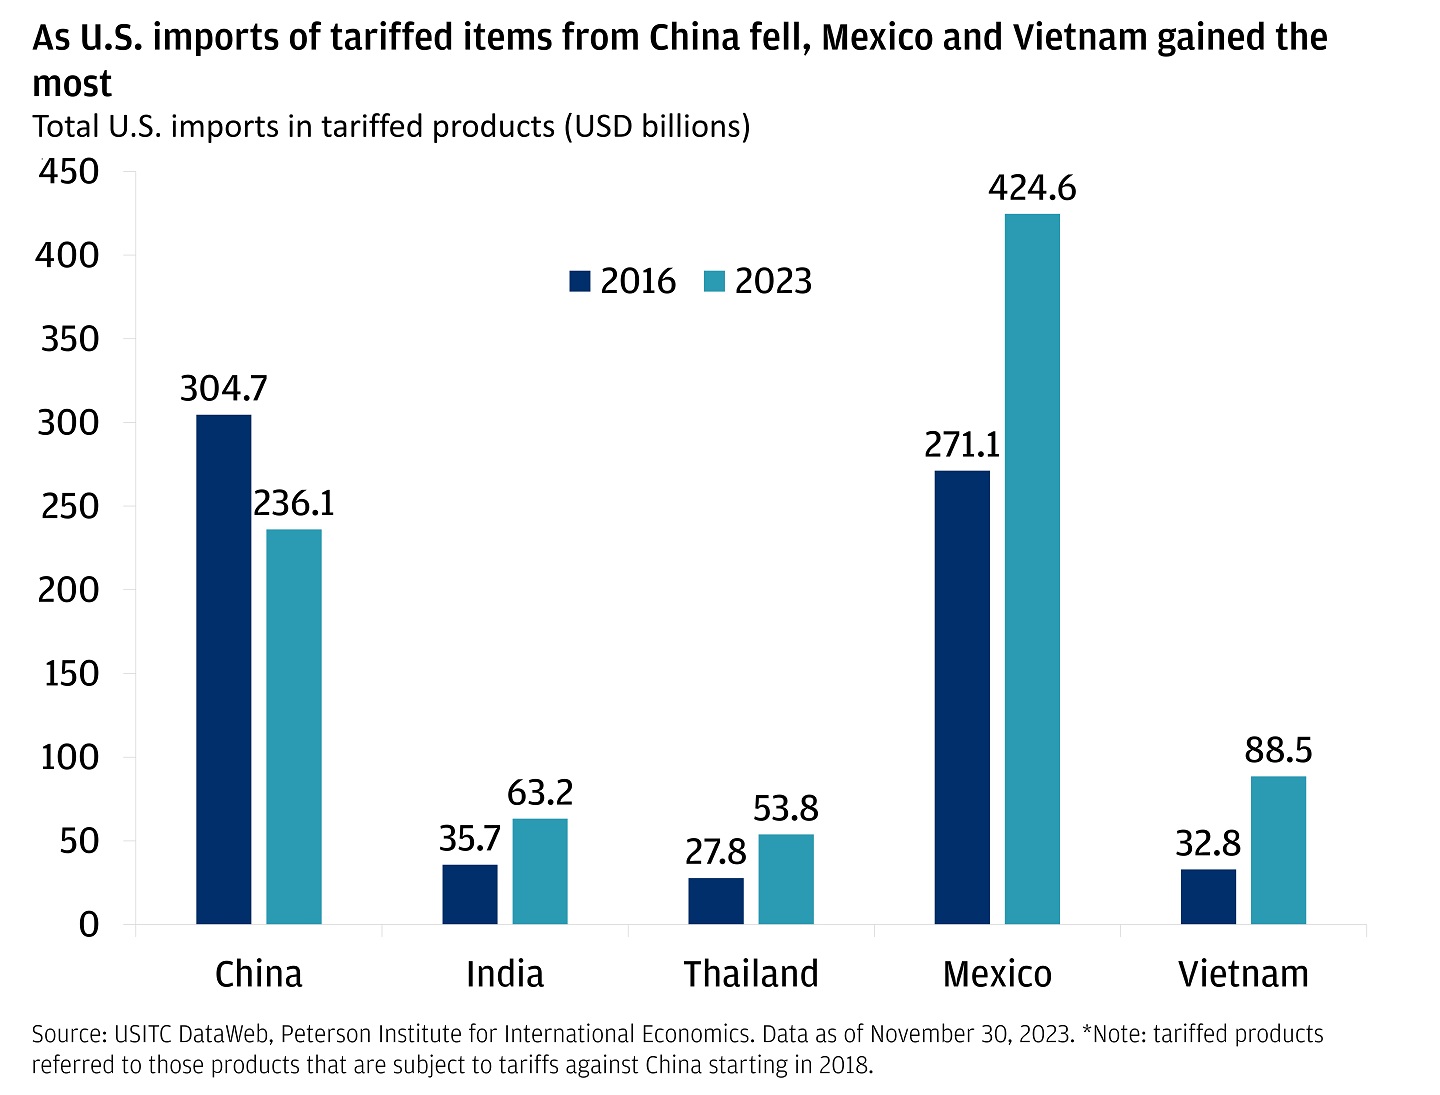 The bar graph describes the total U.S. imports in tariffed products in USD Billion for 2016 and 2023.